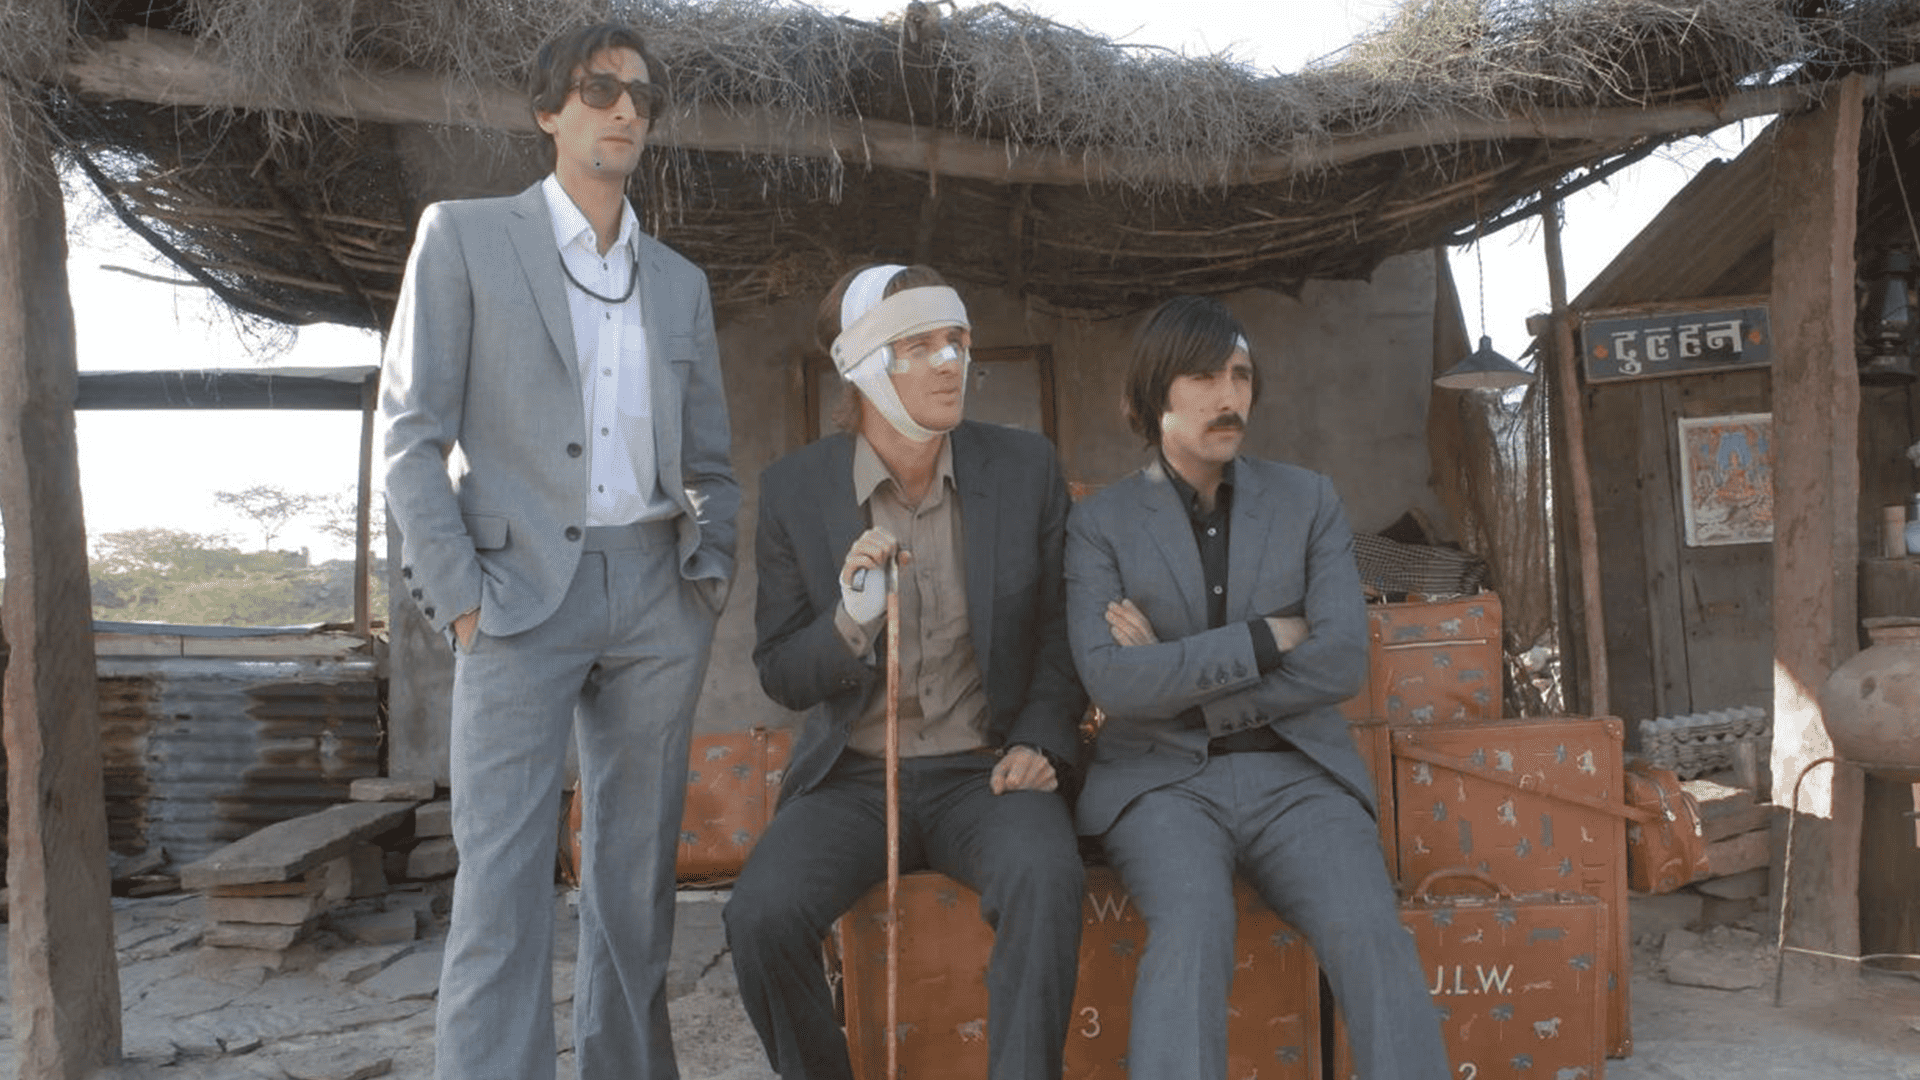 Adrien Brody, Owen Wilson, and Jason Schwartzman with a collection of luggage in this image from Indian Paintbrush